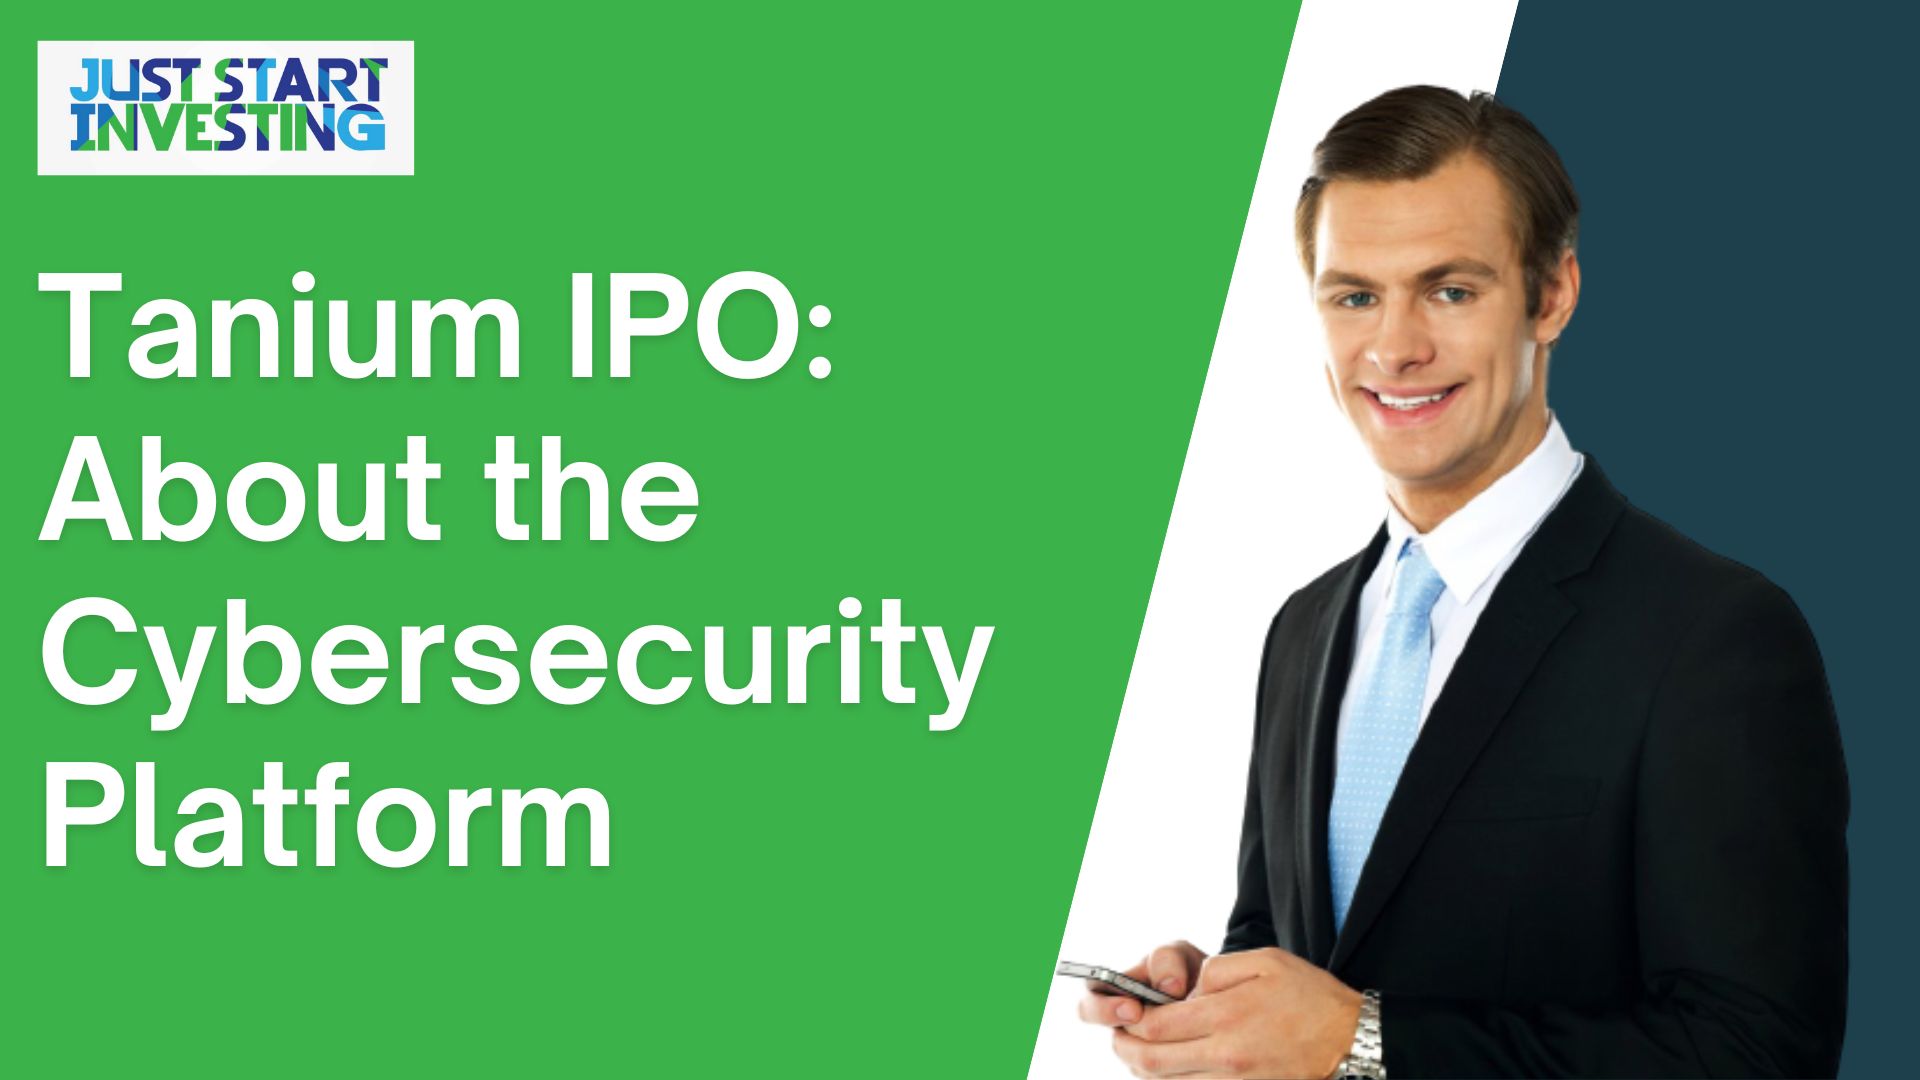 Tanium IPO About the Cybersecurity Platform